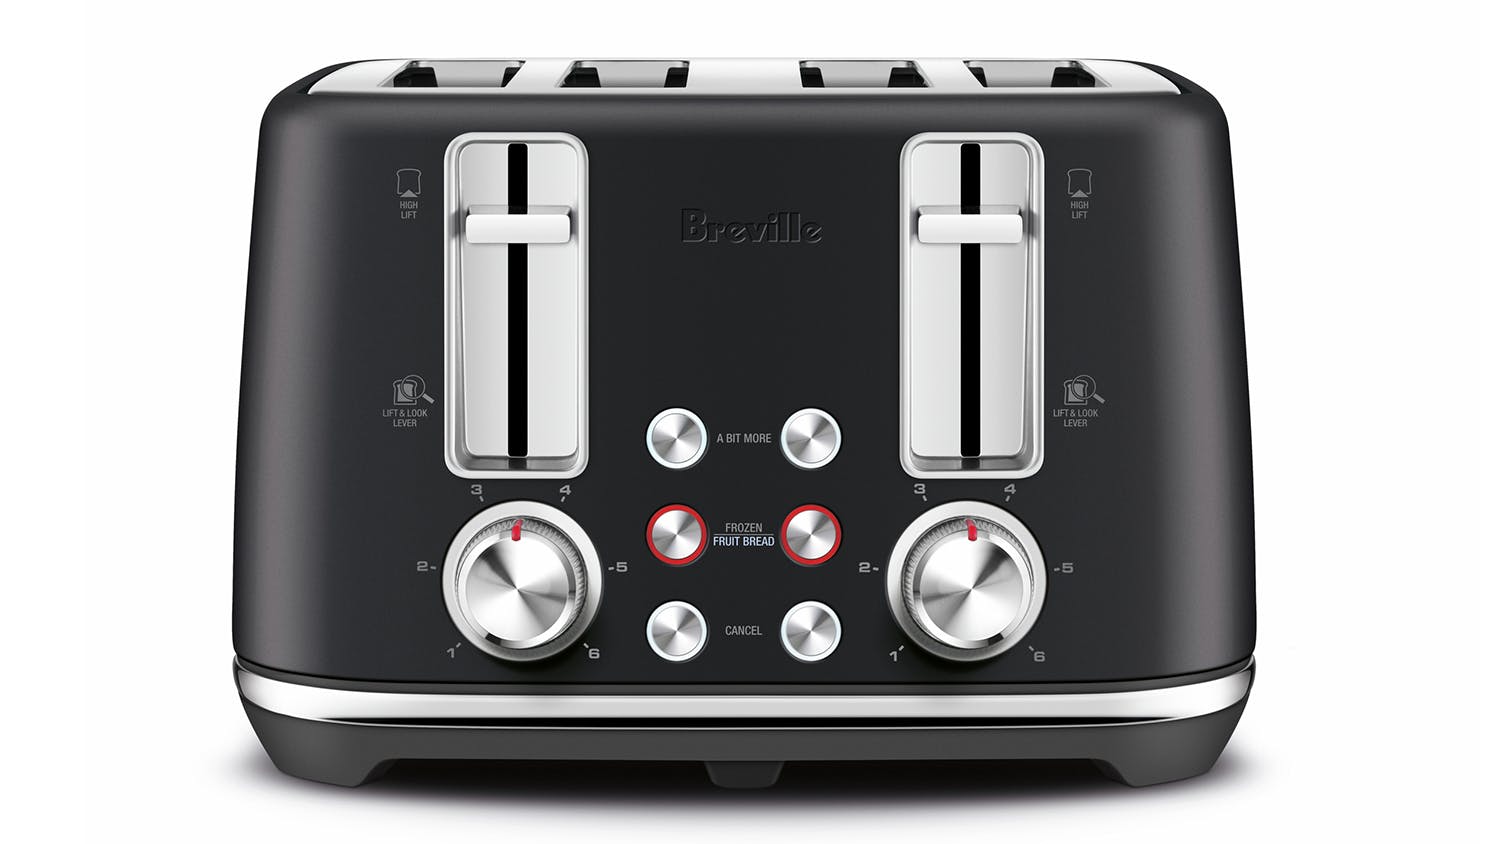 Breville 4-Slice A Bit More Toaster in Brushed Stainless Steel